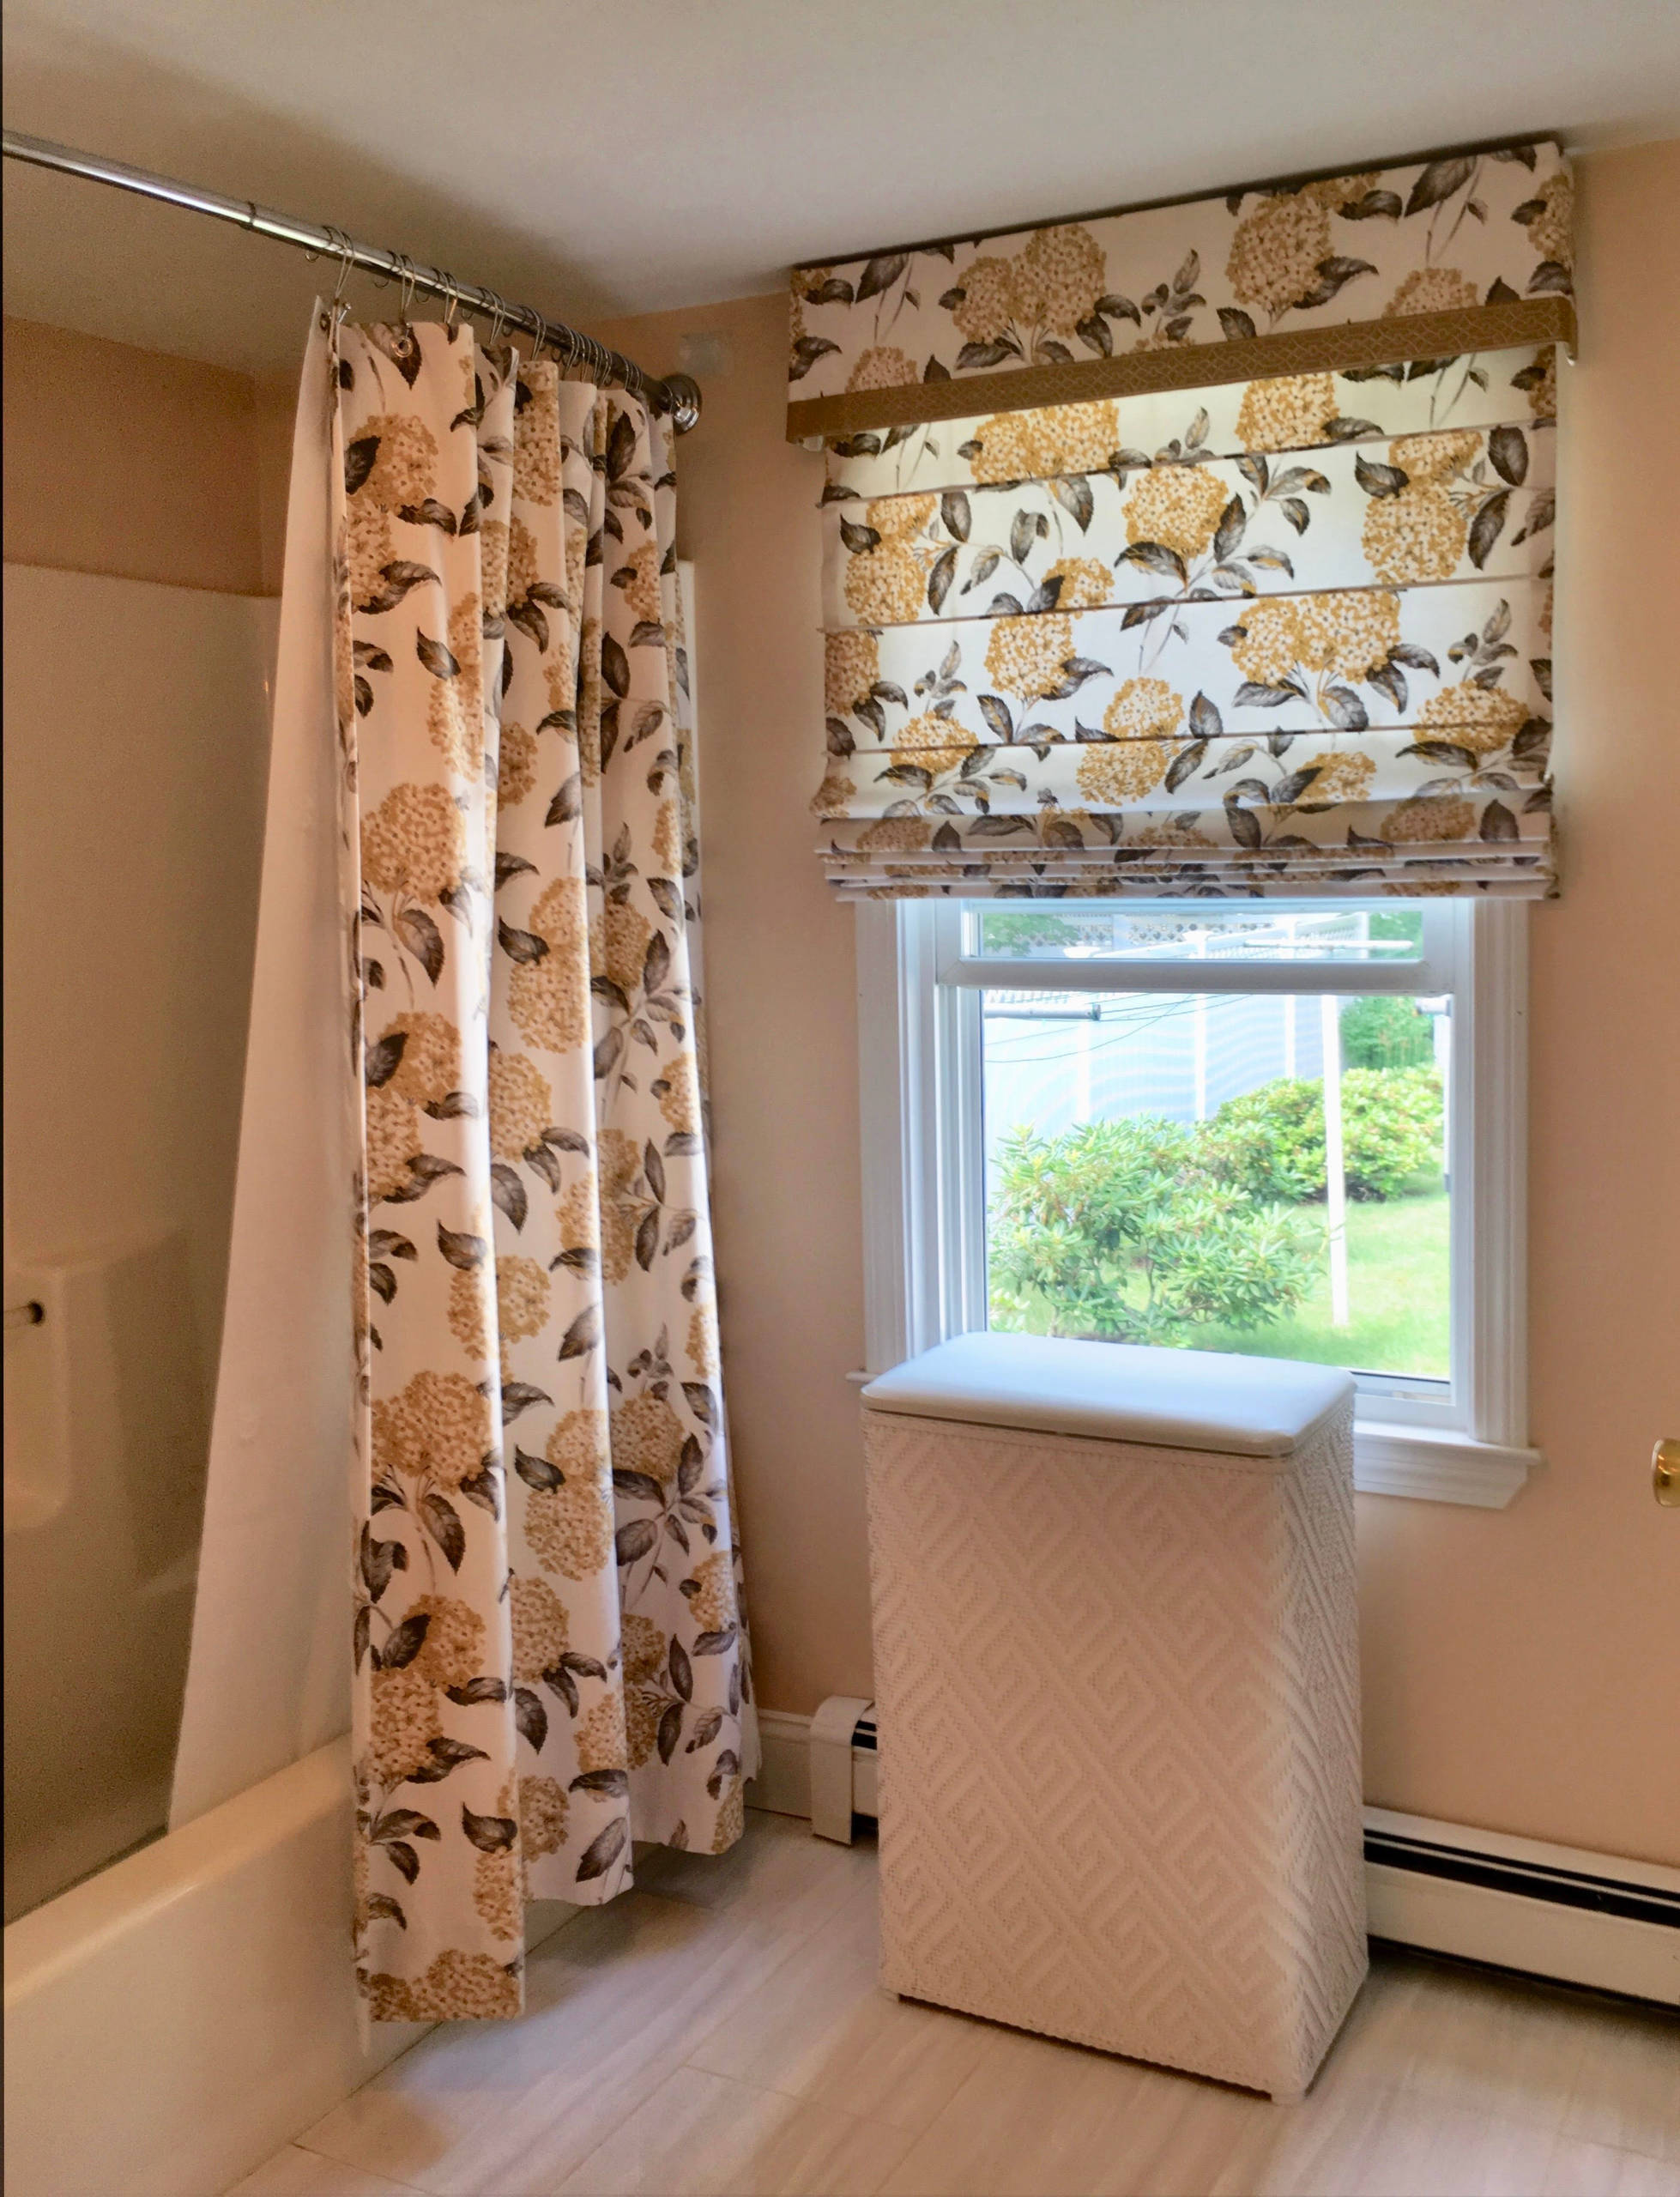 Cottage Update with Fabric Roman Shades